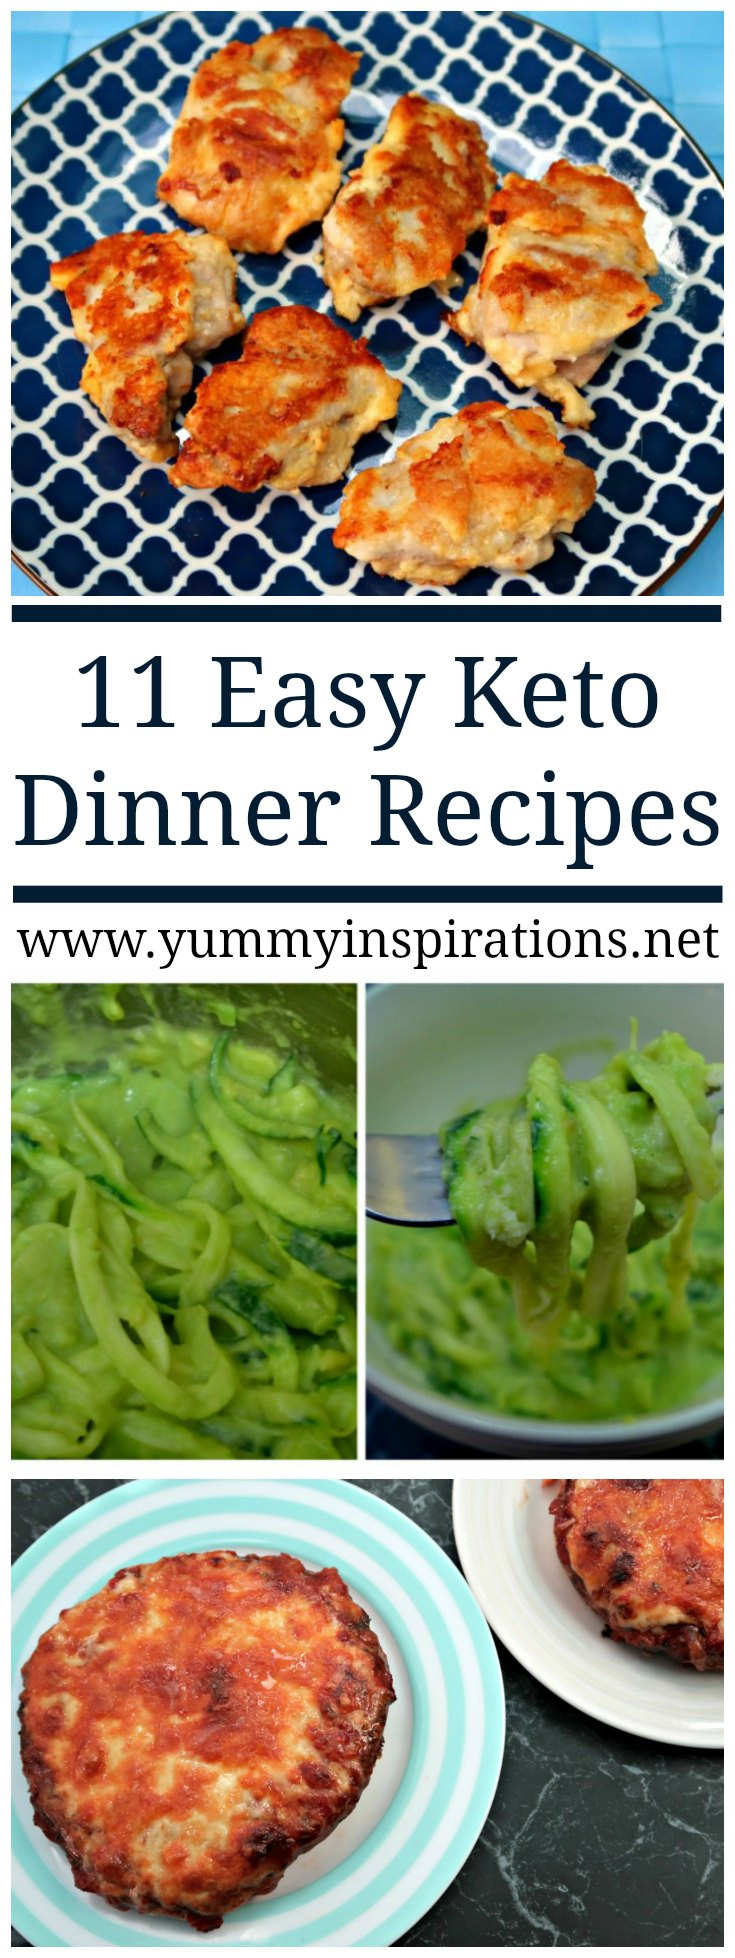 Keto Diet Recipes Dinners Meals
 11 Easy Keto Dinner Recipes Quick Low Carb Ketogenic